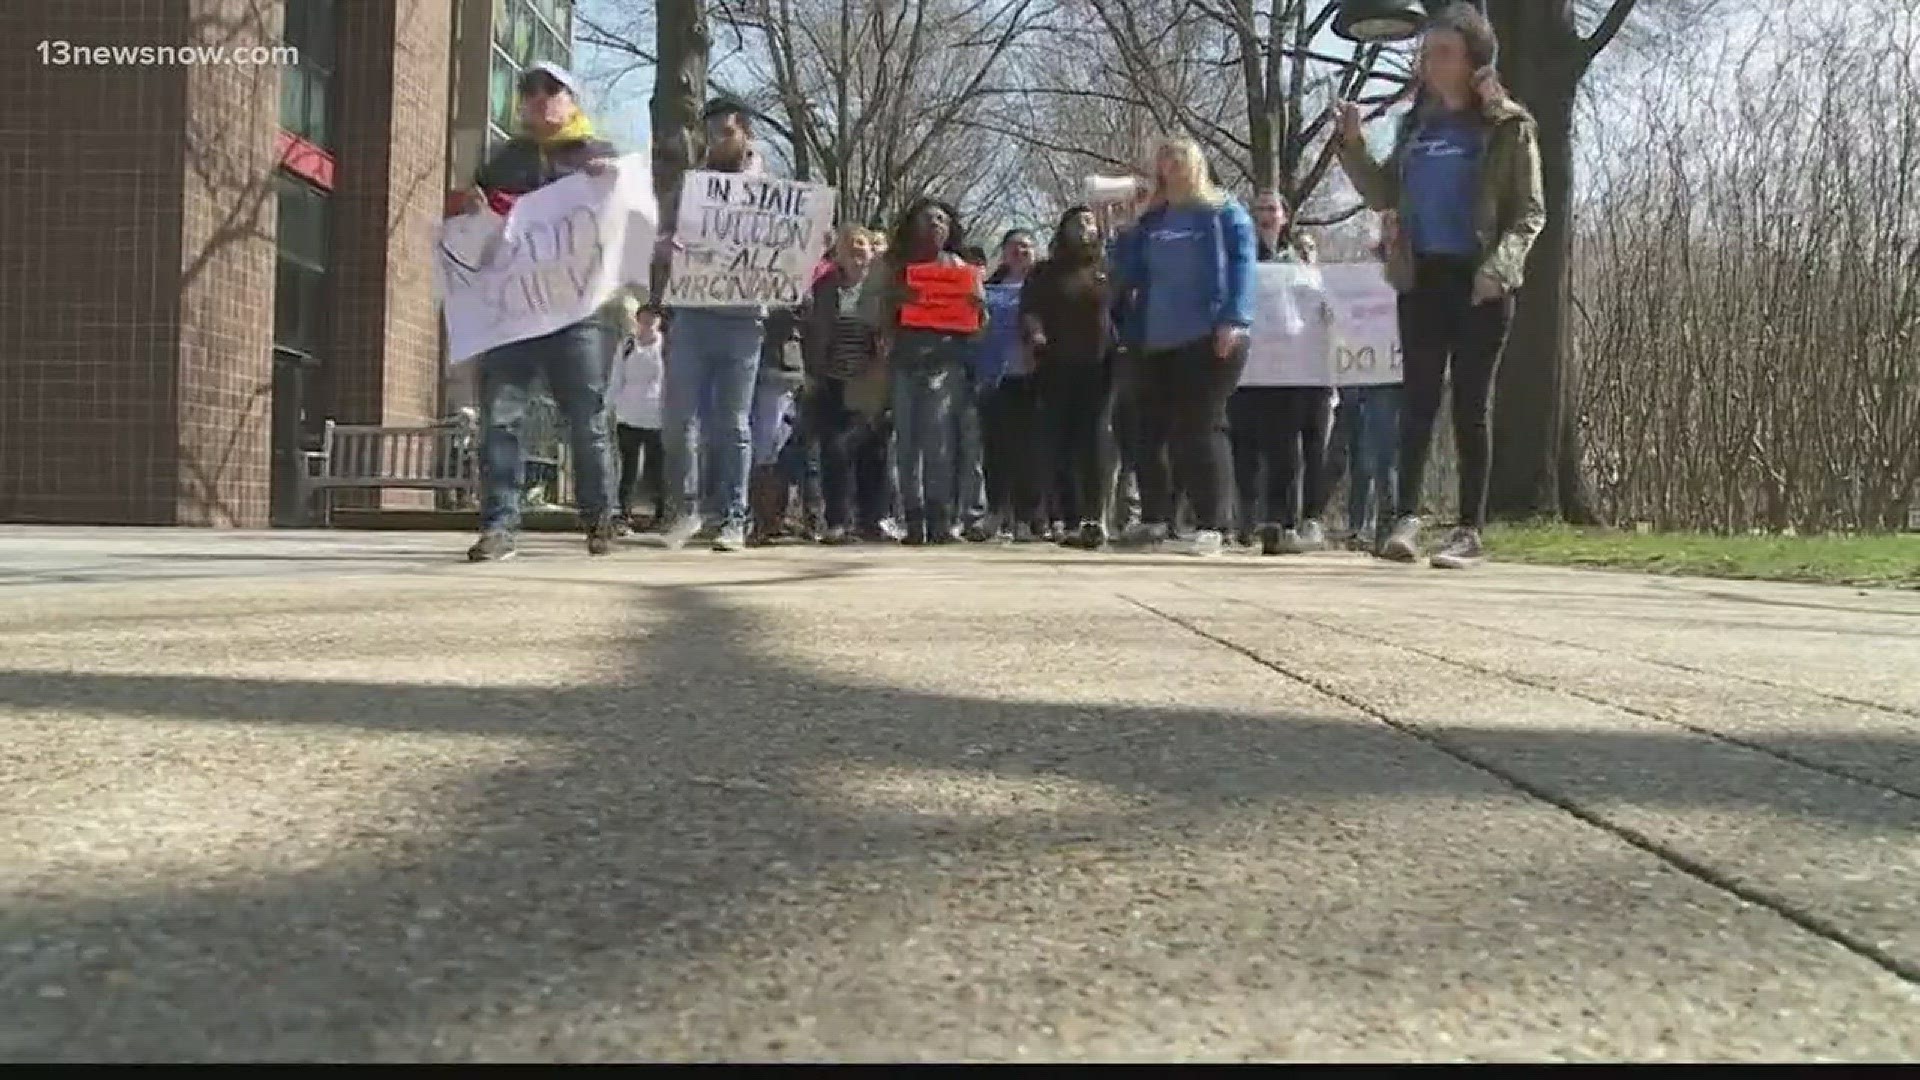 ODU students are demanding the University reject a state policy they say unfairly targets the children of immigrants.